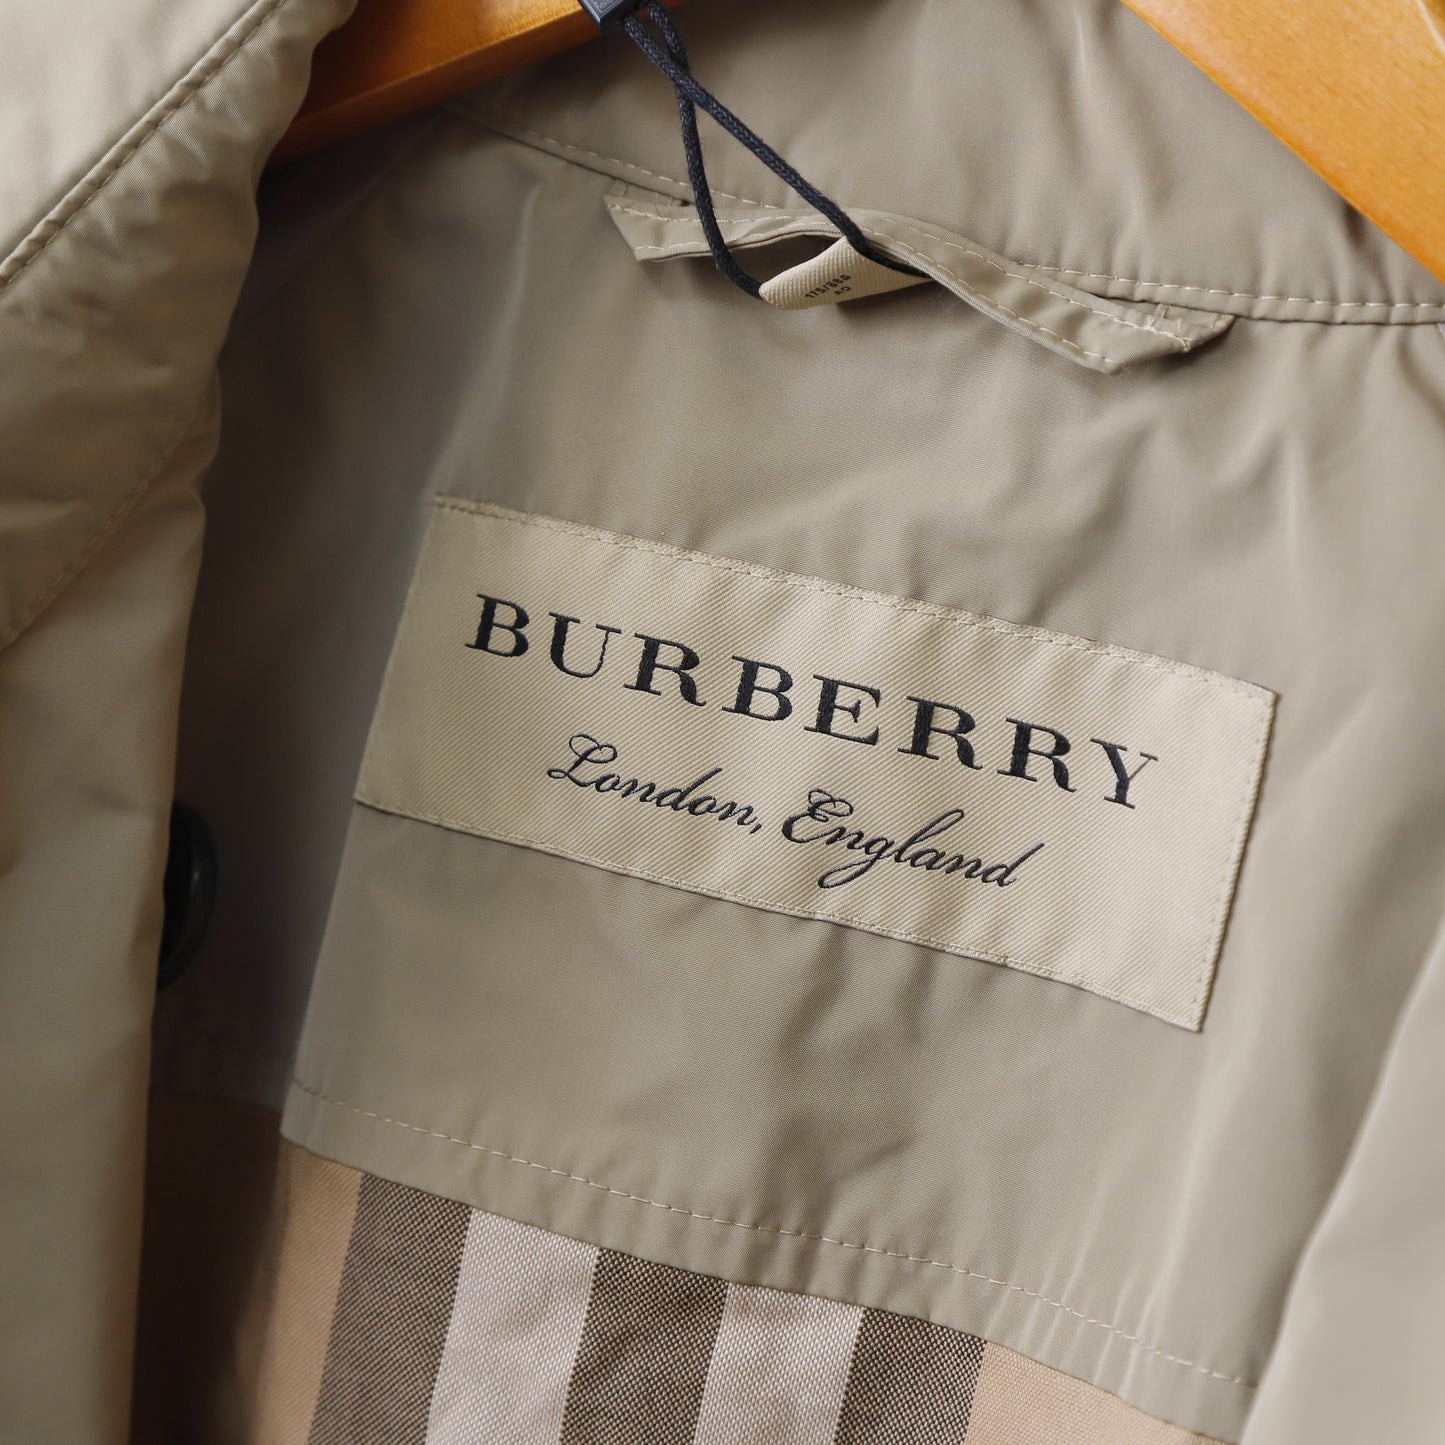 Burberry Trench Coat - Size M